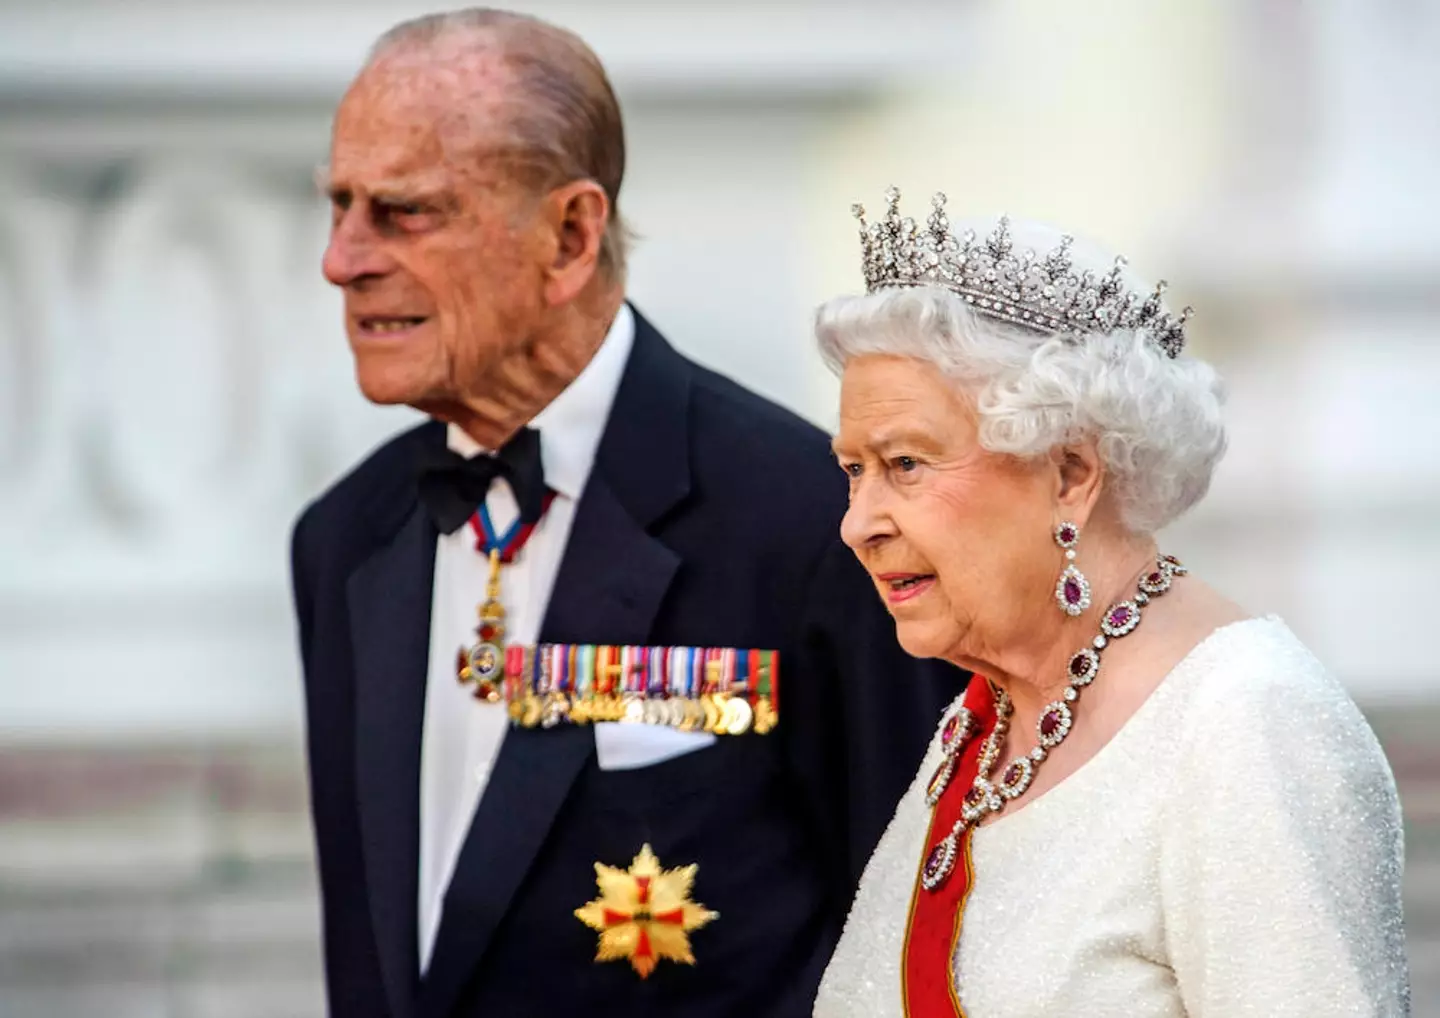 Prince Philip is set to be moved from the Royal Vault so he can be laid to rest next to his wife of 73 years.